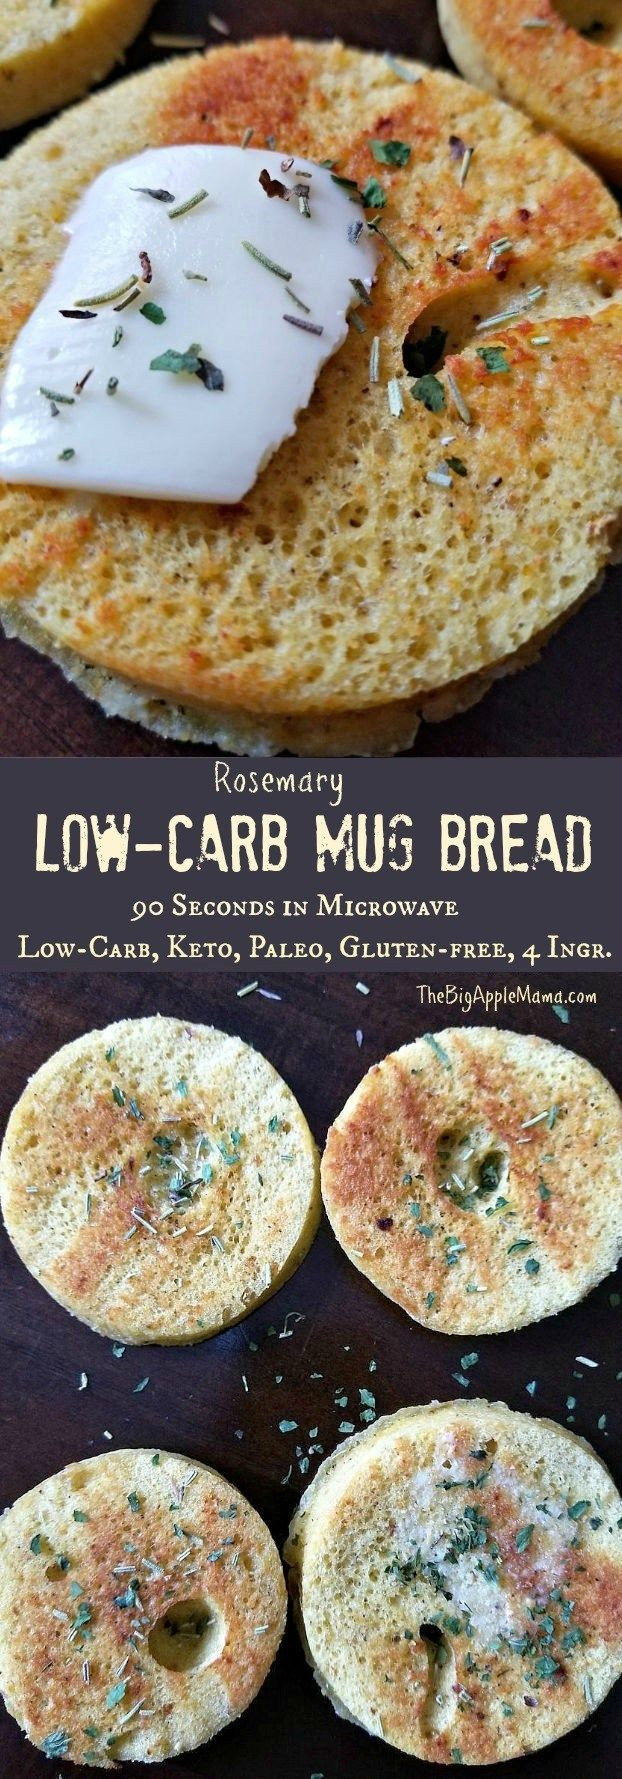 Low Carb Bread Microwave
 Best Low Carb Keto Mug Bread 90 seconds in microwave